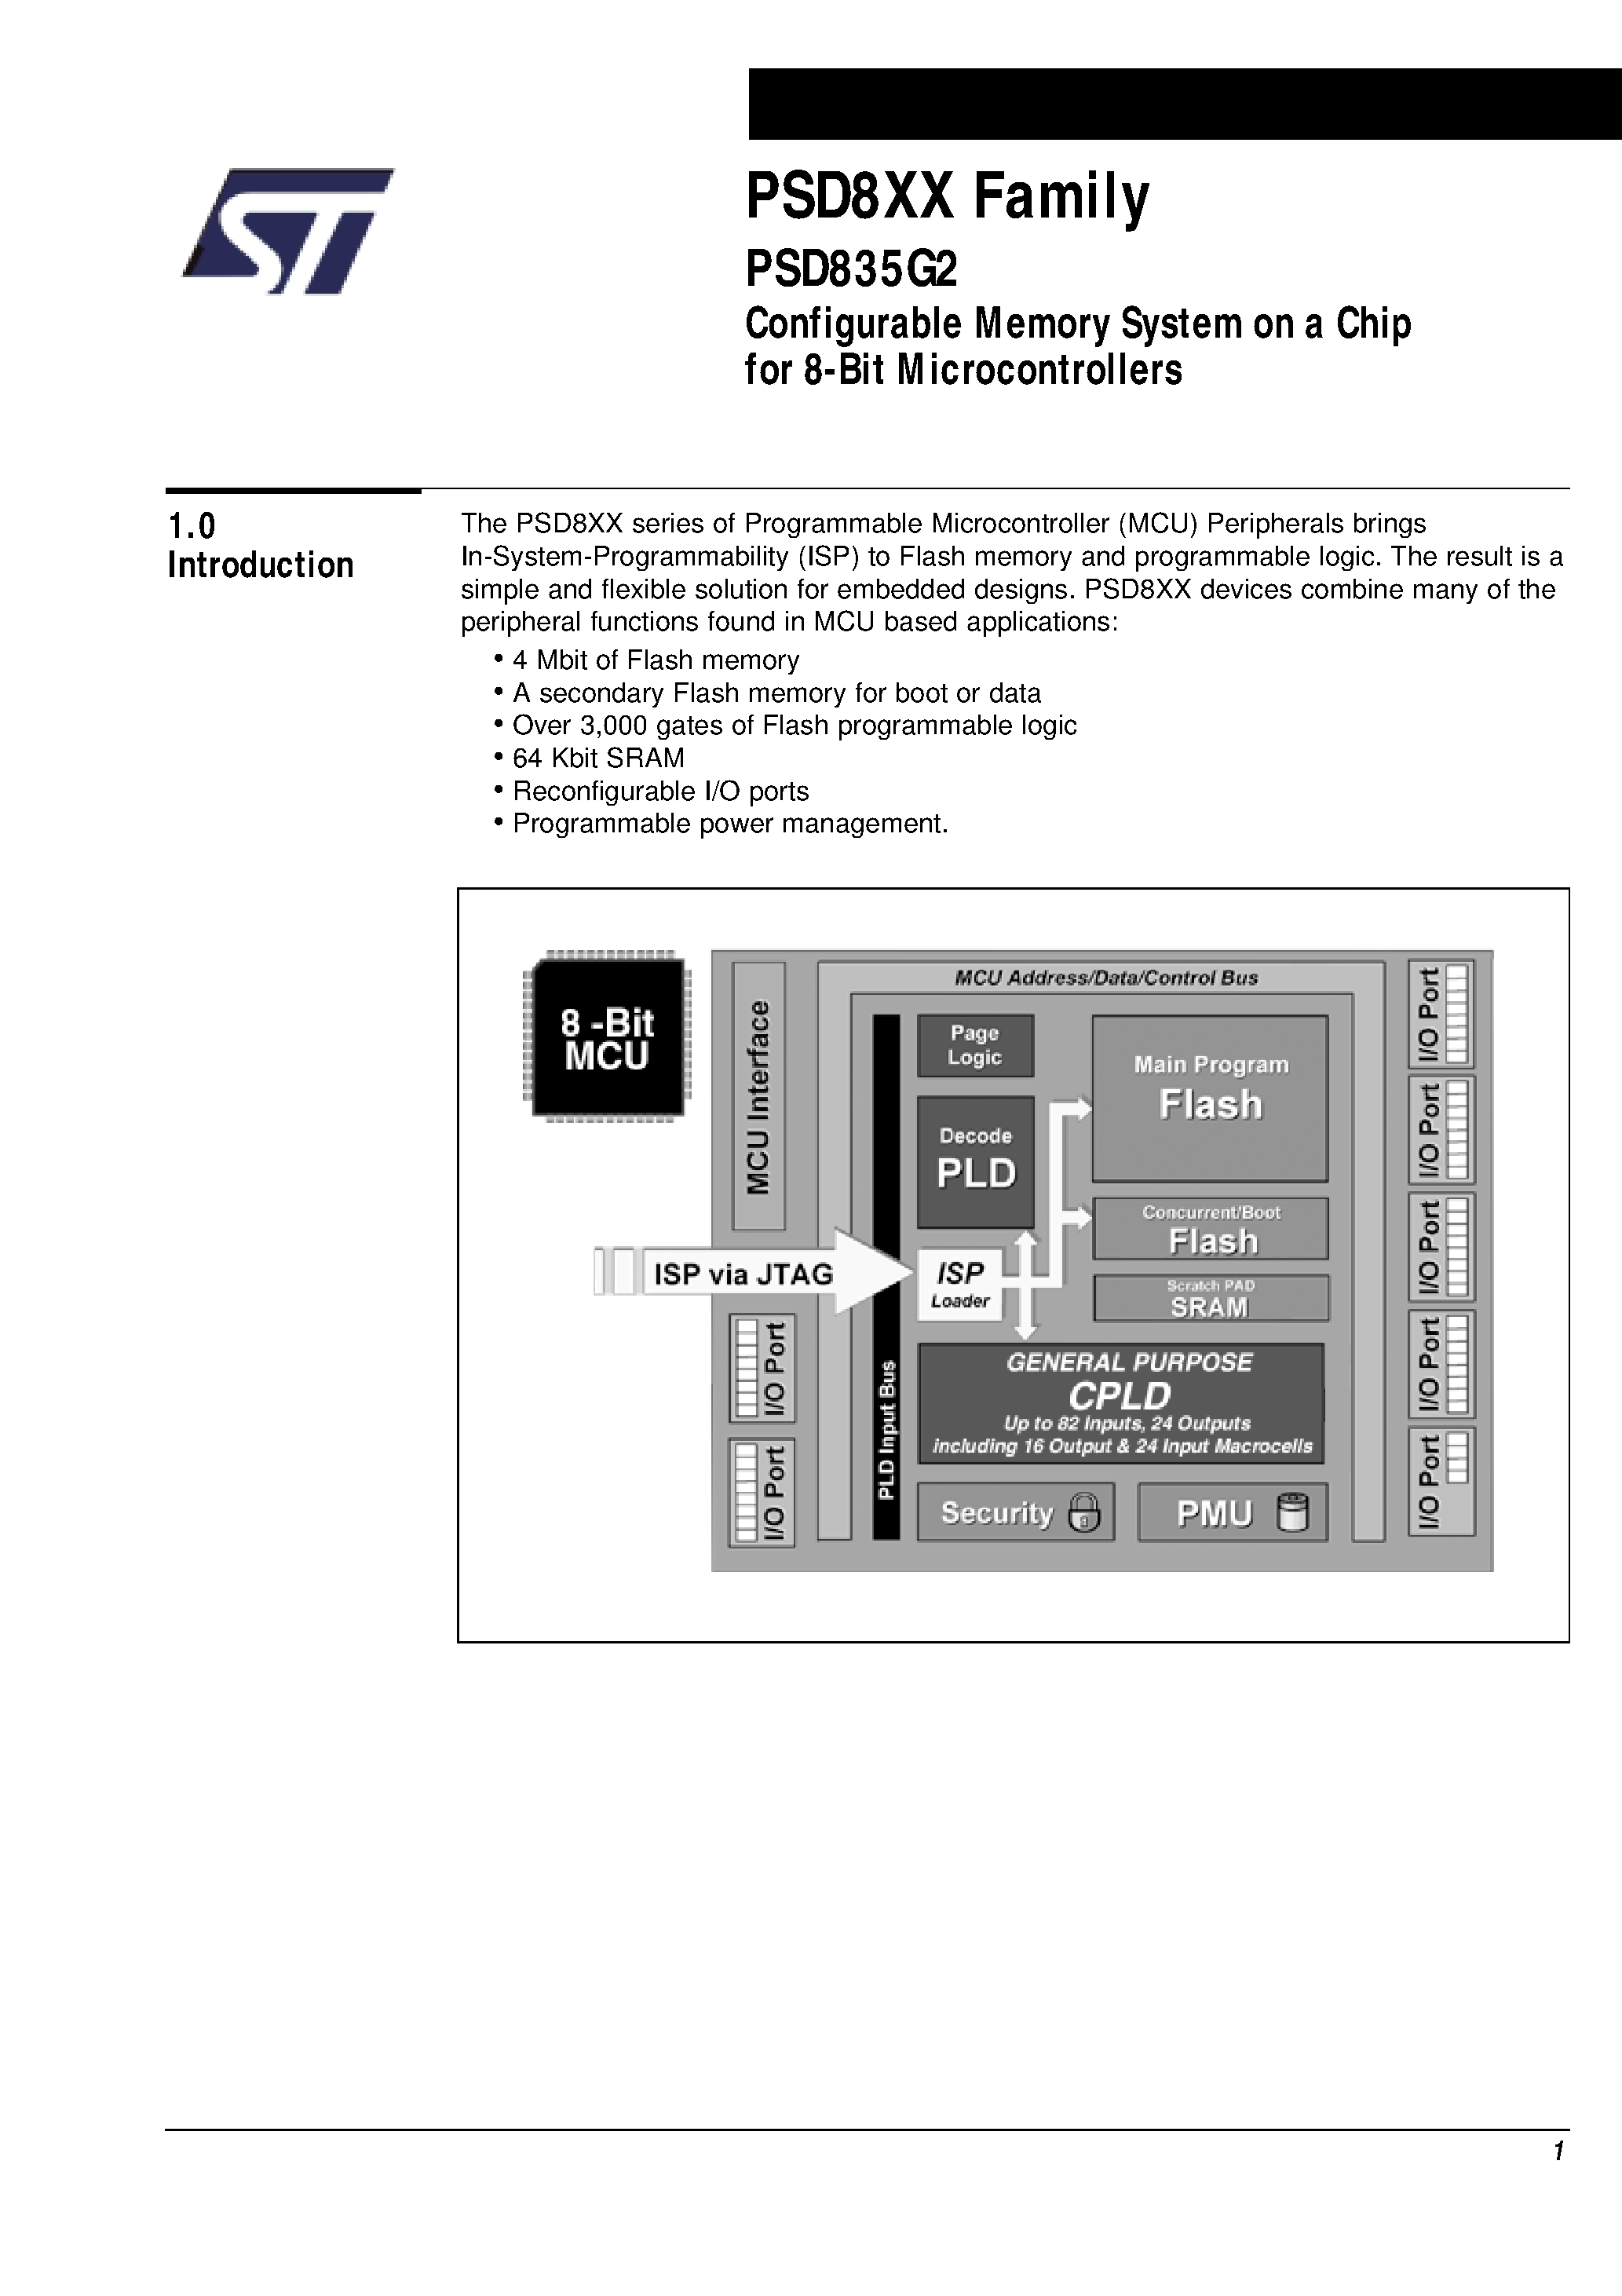 Datasheet PSD835F1-A-70U - Configurable Memory System on a Chip for 8-Bit Microcontrollers page 2